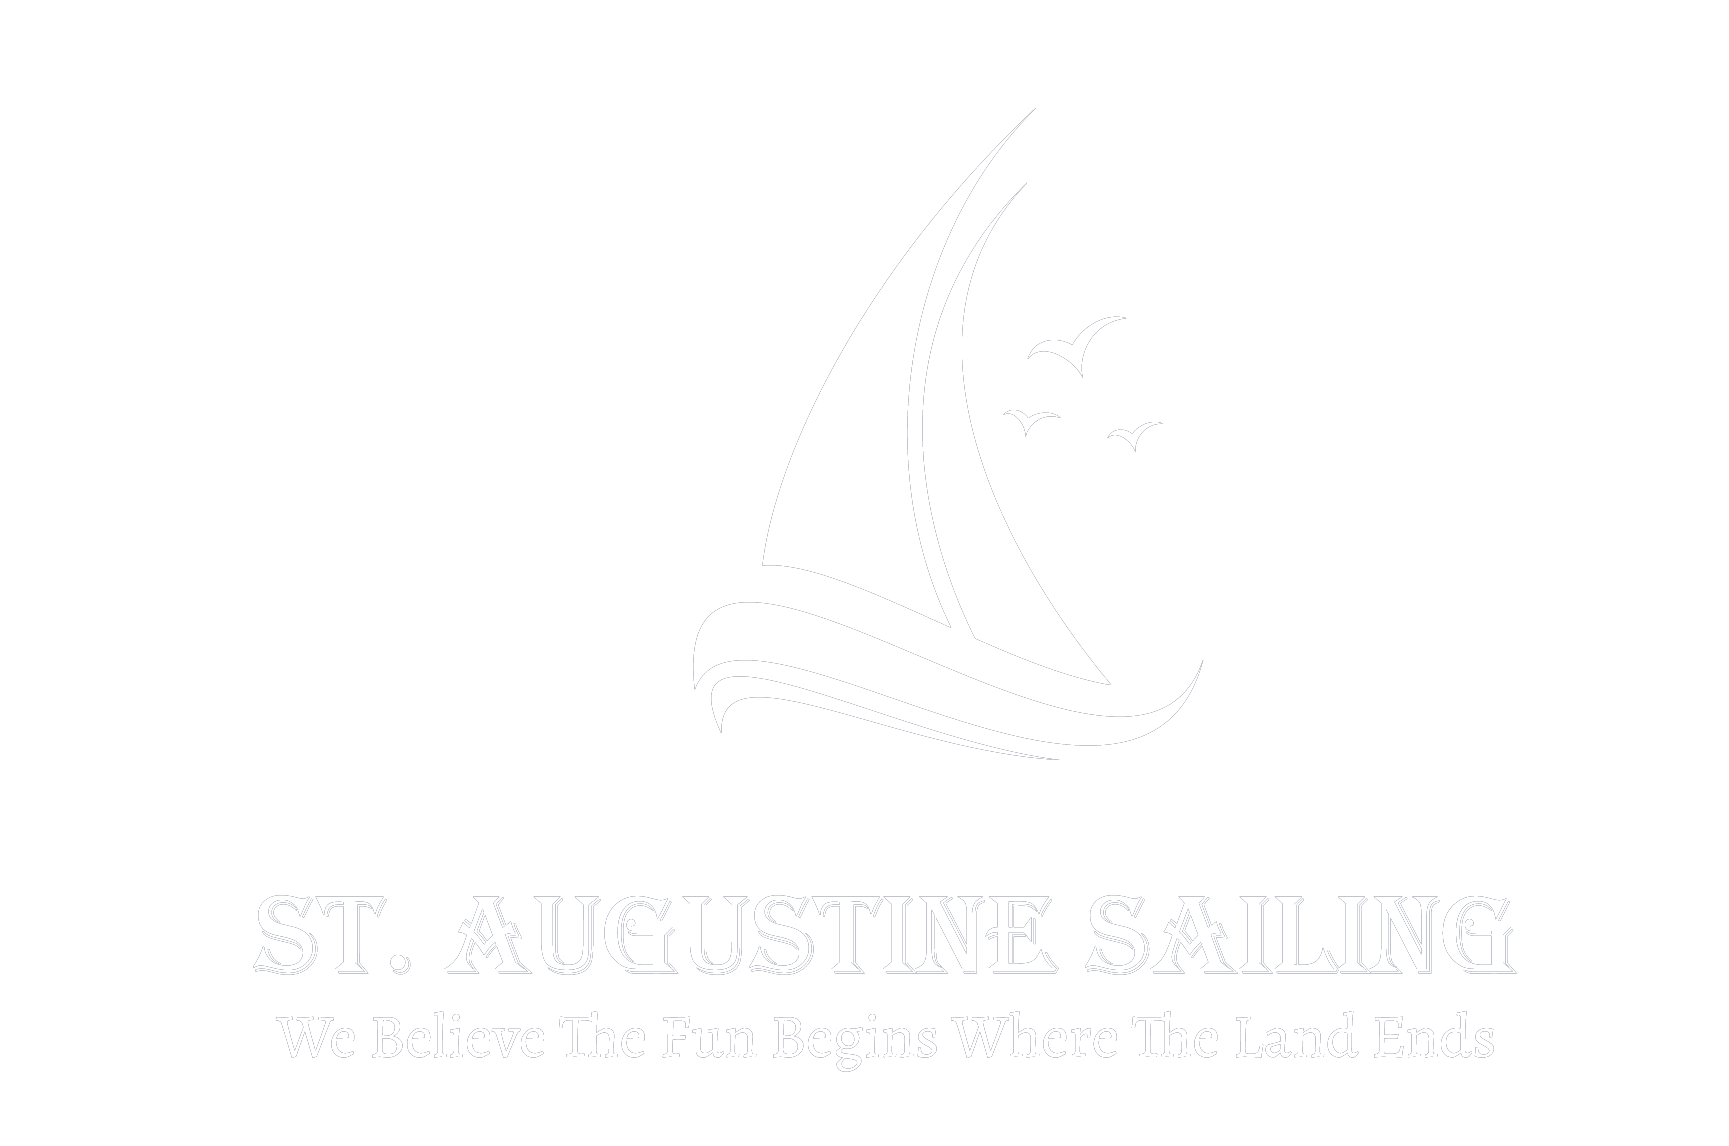 St Augustine Sailing - Sailing - Northeast Florida - All Points Yacht Sales - Yachts for Sale - Boats for Sale - Dinner Cruise - Charcuterie - Weddings in Florida - Unique Wedding Venues - Proposal